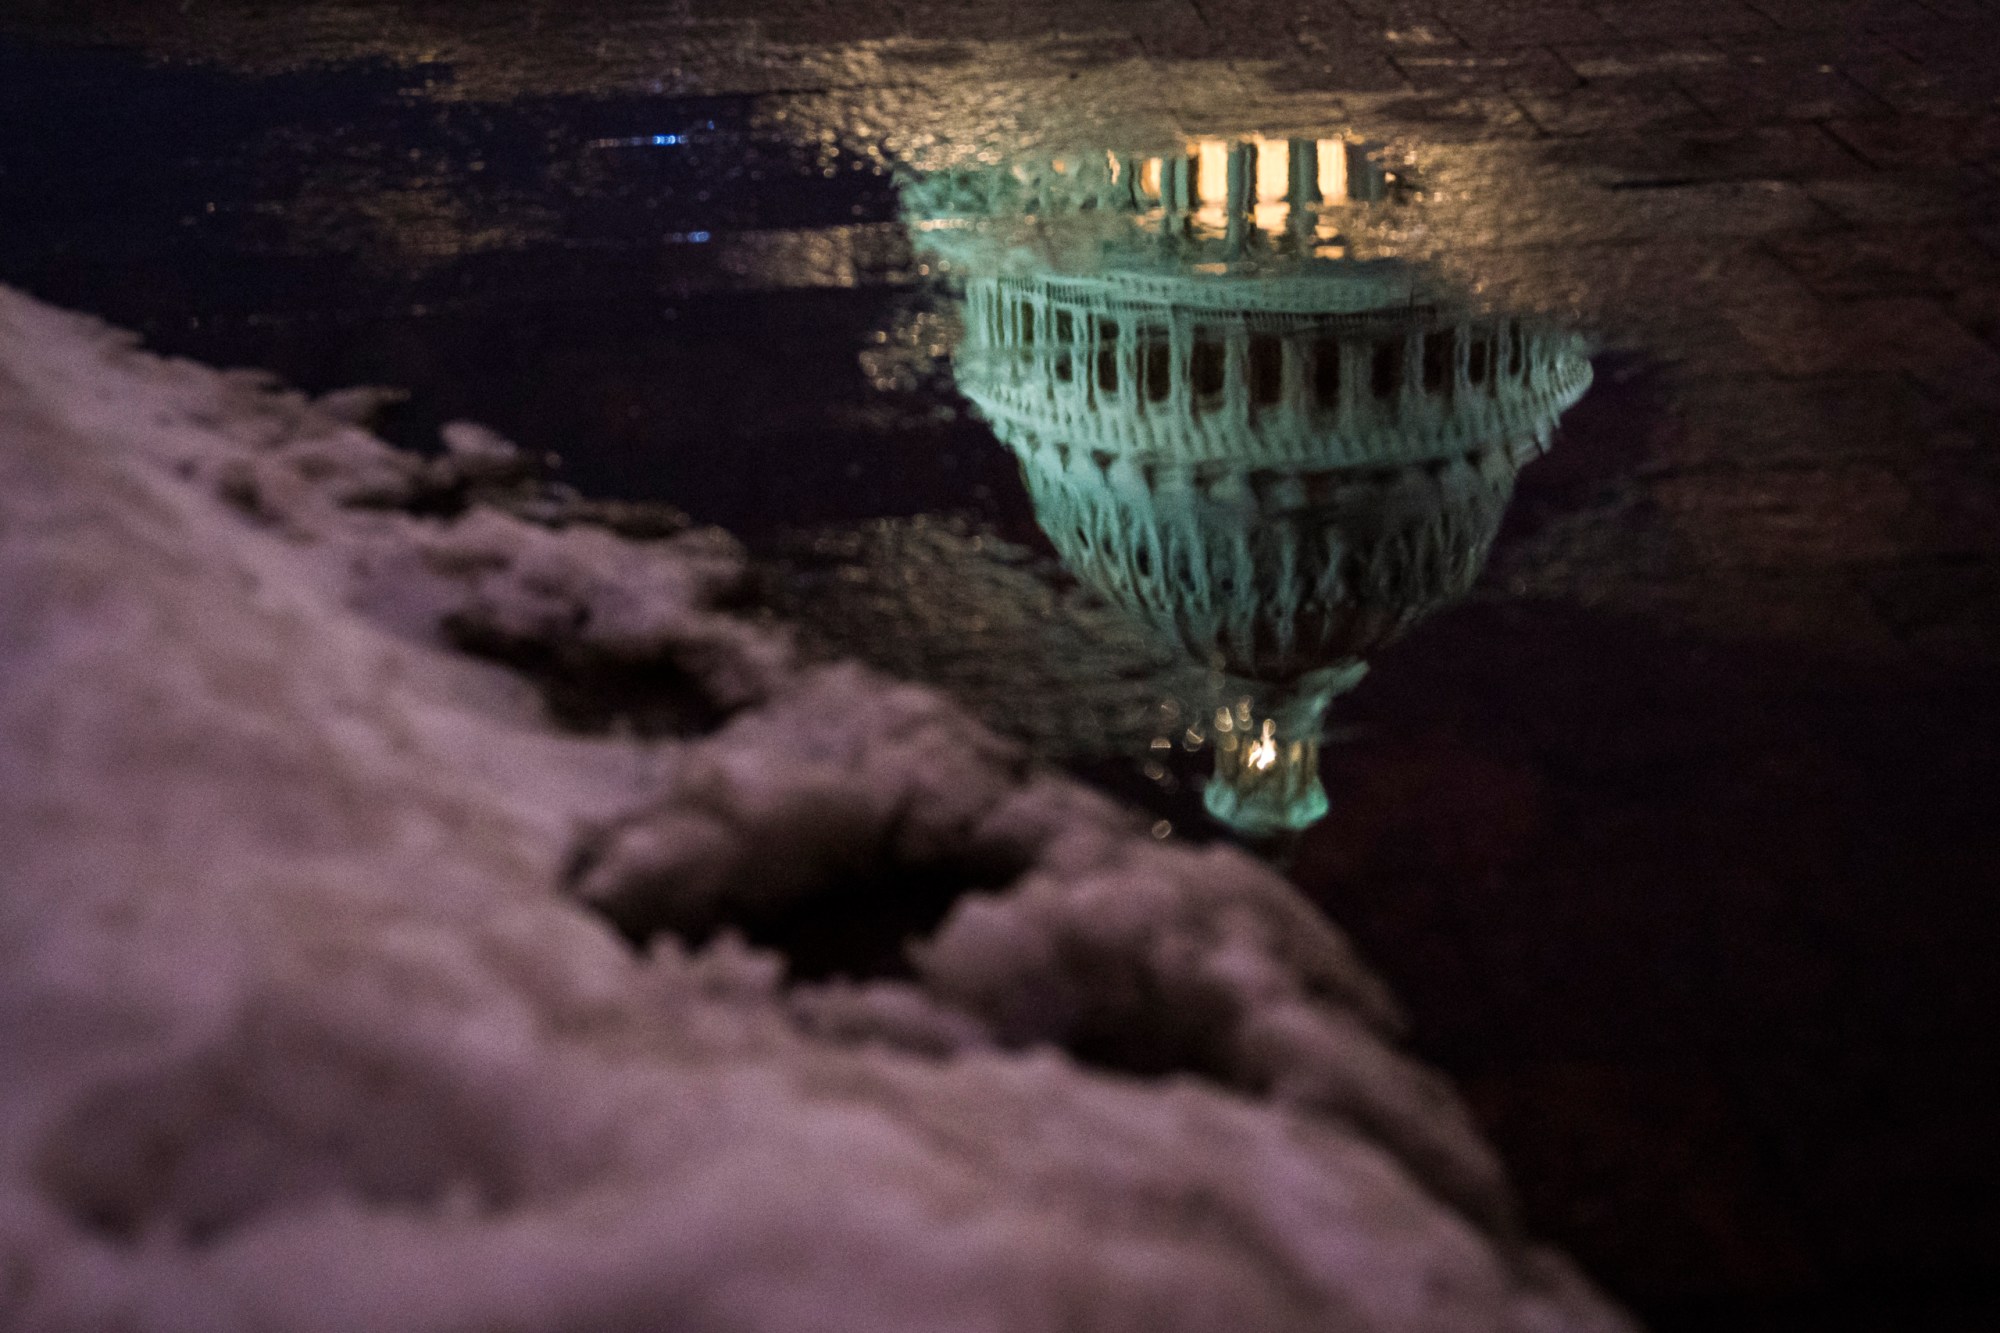 WASHINGTON, DC - MARCH 21: A reflection of the US Capitol Building dome is seen as the sun sets after a Spring snow fall on Wednesday, March 21, 2018 in Washington, DC. (Photo by Jabin Botsford/The Washington Post via Getty Images)